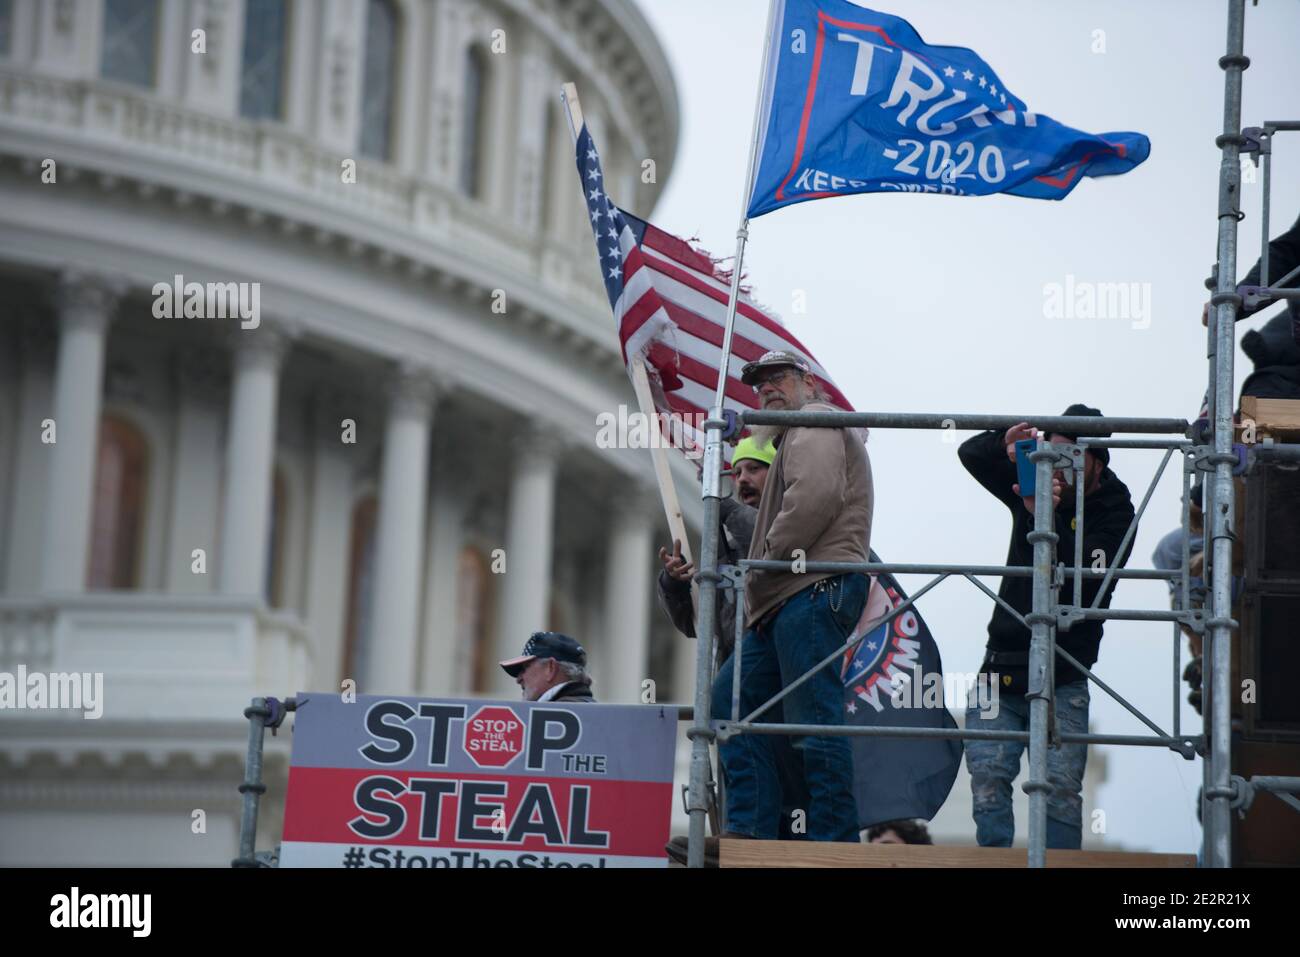 January 6th 2021. Stop The Steal sign by Protesters at Capitol Hill with Donald Trump 2020 flags. US Capitol Building, Washington DC.USA Stock Photo